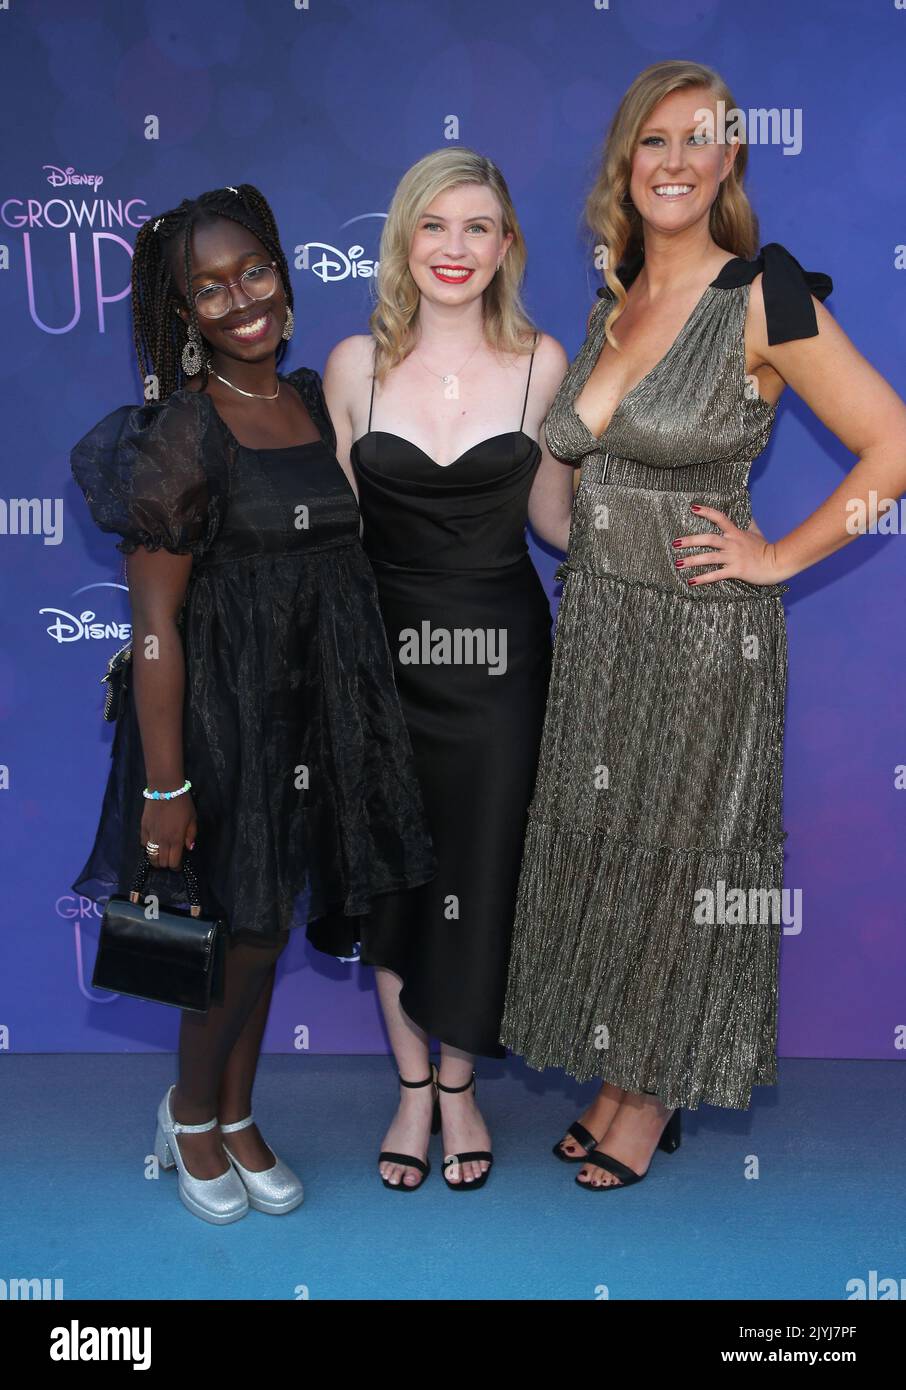 Los Angeles, Ca. 7th Sep, 2022. Sofia Ongele, Alex Crotty, Nicole Galovski at the Disney   LA Premiere of Growing Up at NeuHouse in Los Angeles, California on September 7, 2022. Credit: Faye Sadou/Media Punch/Alamy Live News Stock Photo